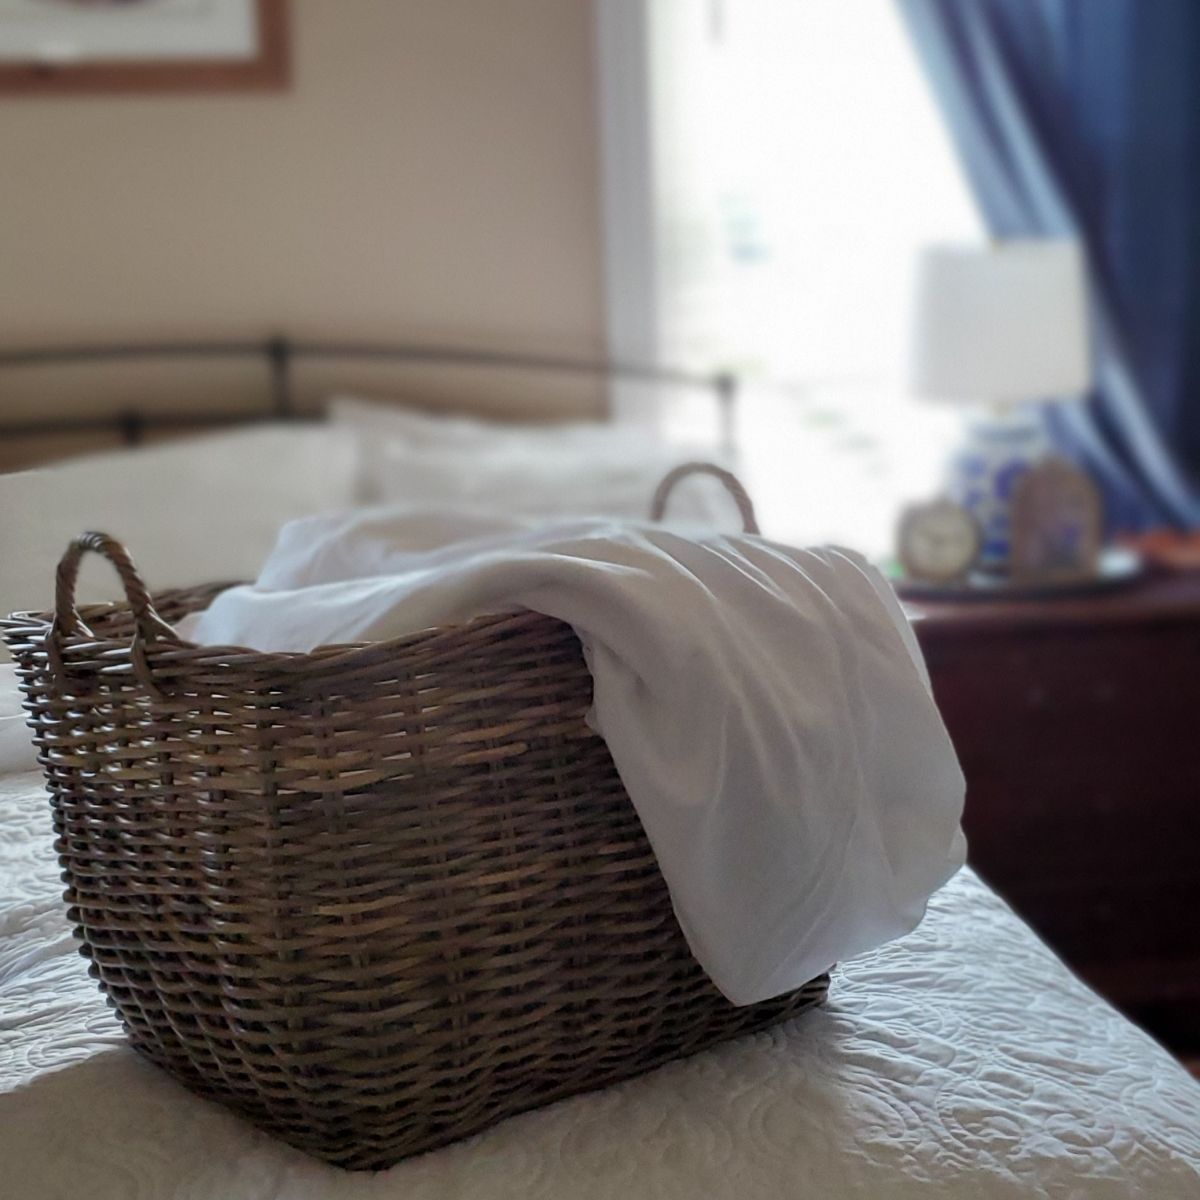 A wicker basket of white linens on top of a freshly made bed.